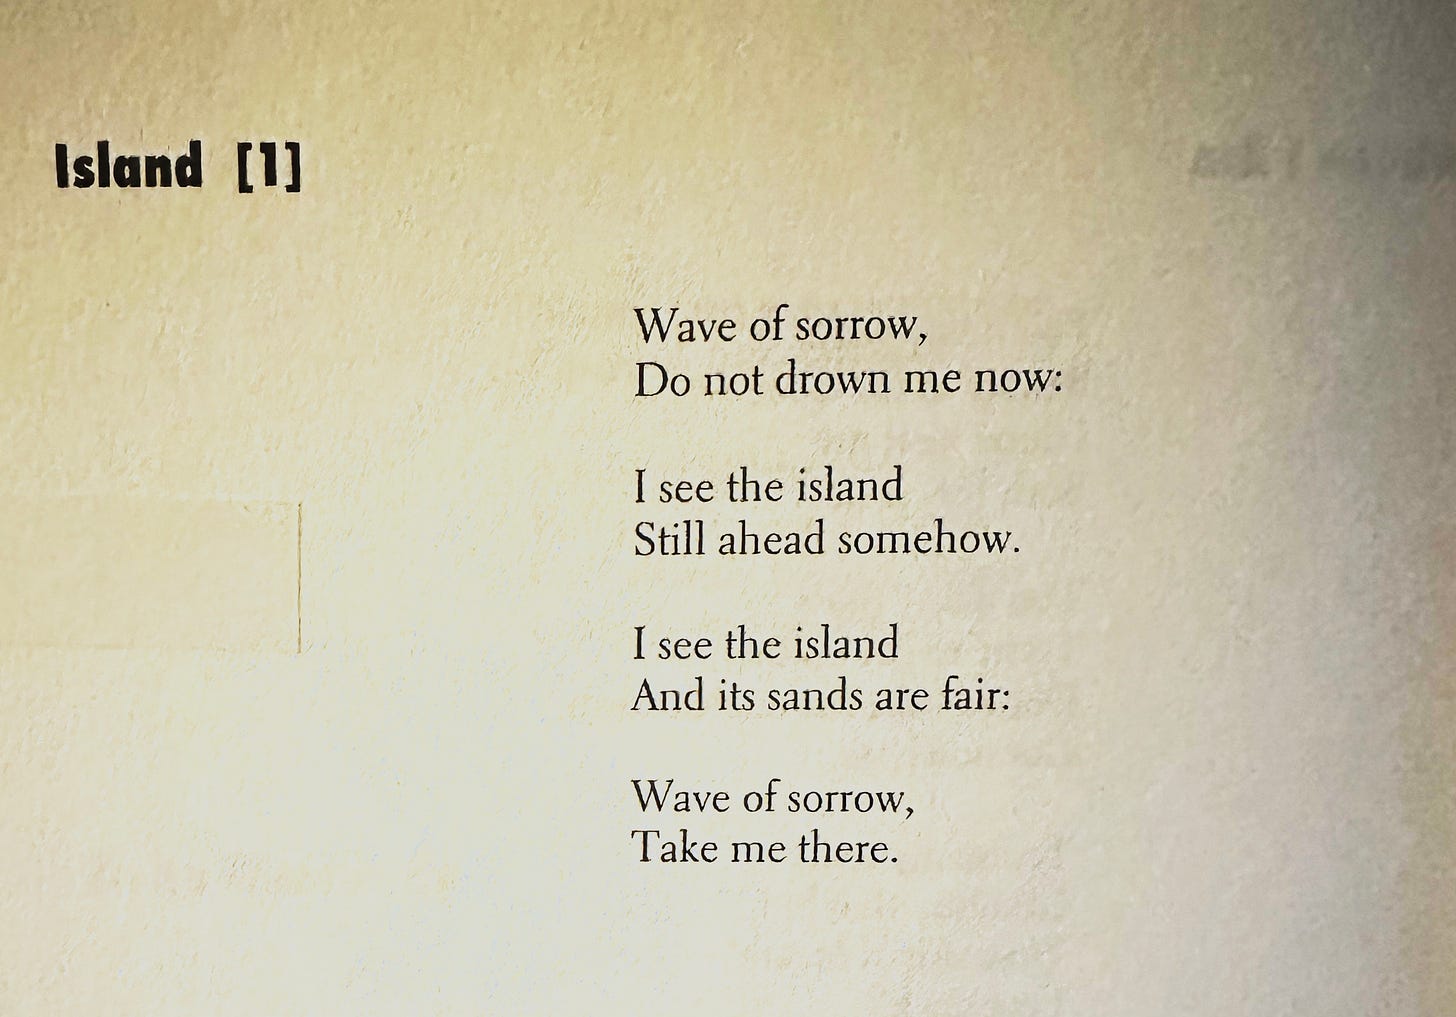 Picture of Langston Hughes' poem "Island [1]": "Wave of sorrow,/ Do not drown me now:// I see the island/ Still ahead somehow.// I see the island/ And its sands are fair:// Wave of sorrow,/ Take me there."